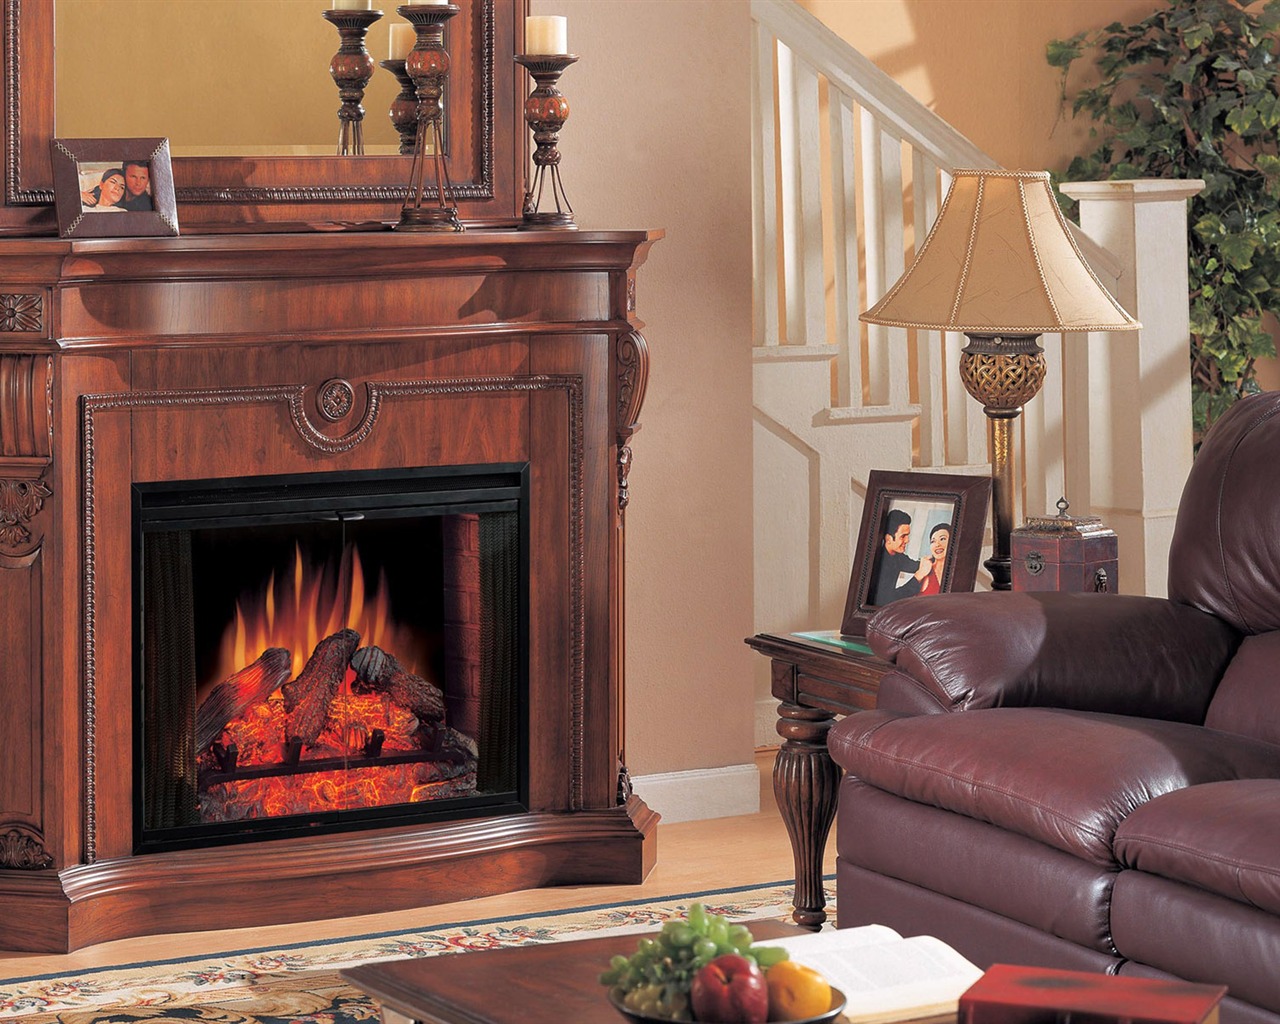 Western-style family fireplace wallpaper (2) #10 - 1280x1024